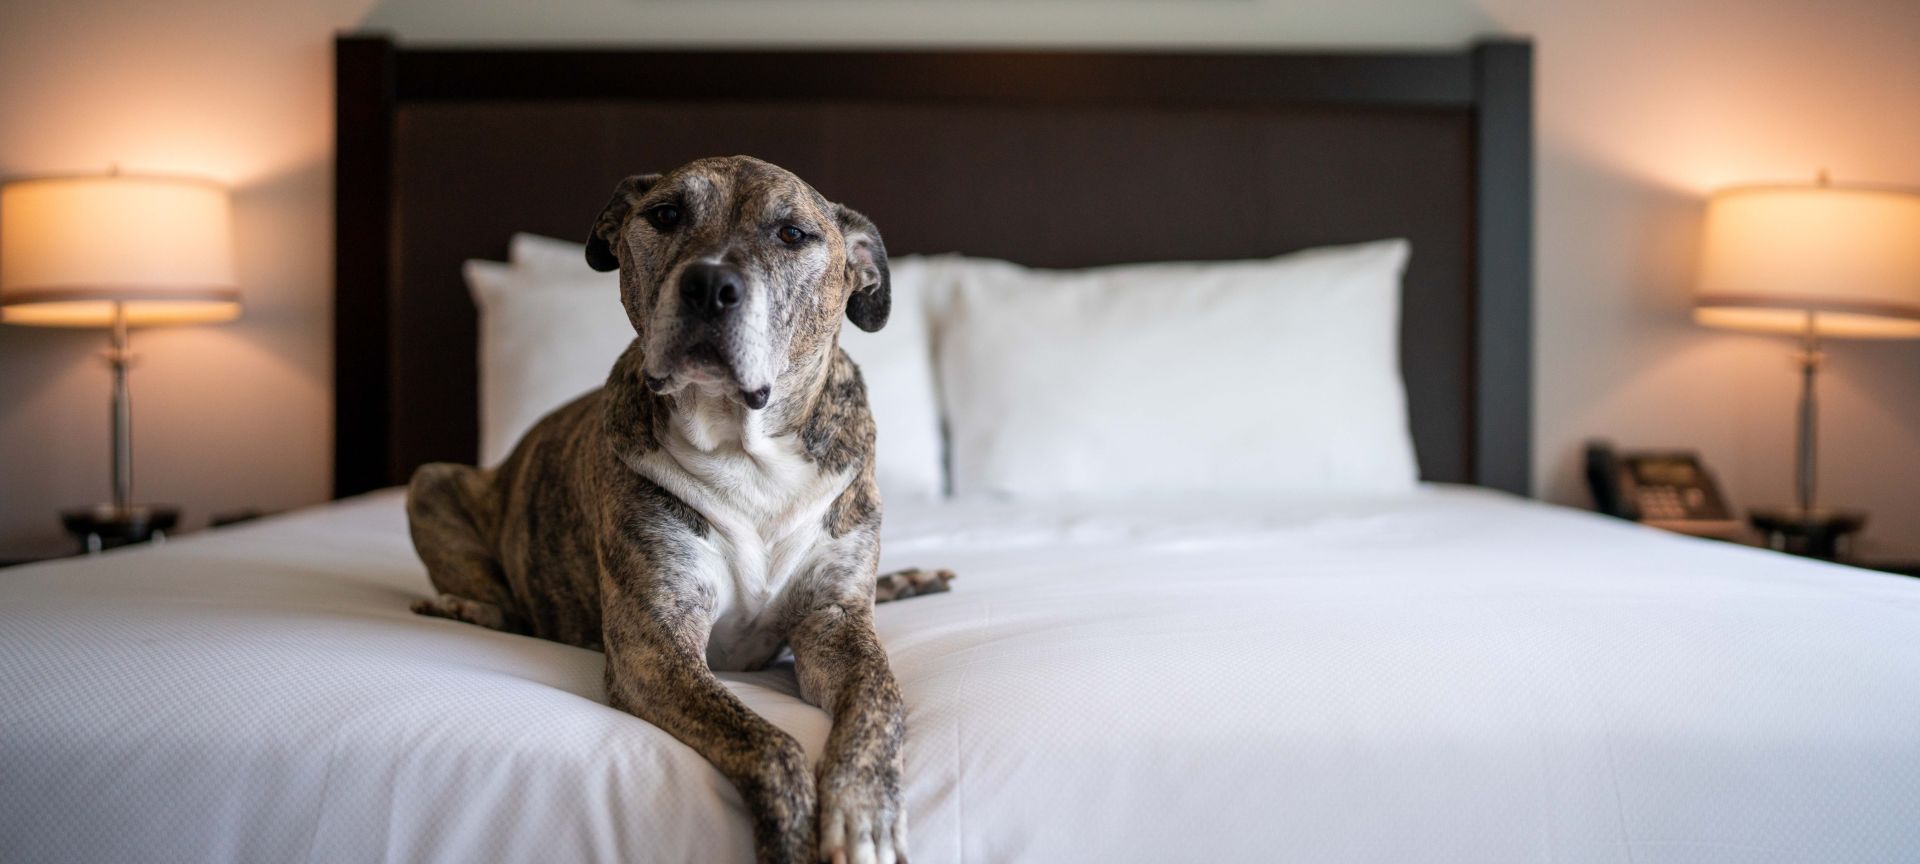 A Dog Sitting On A Bed